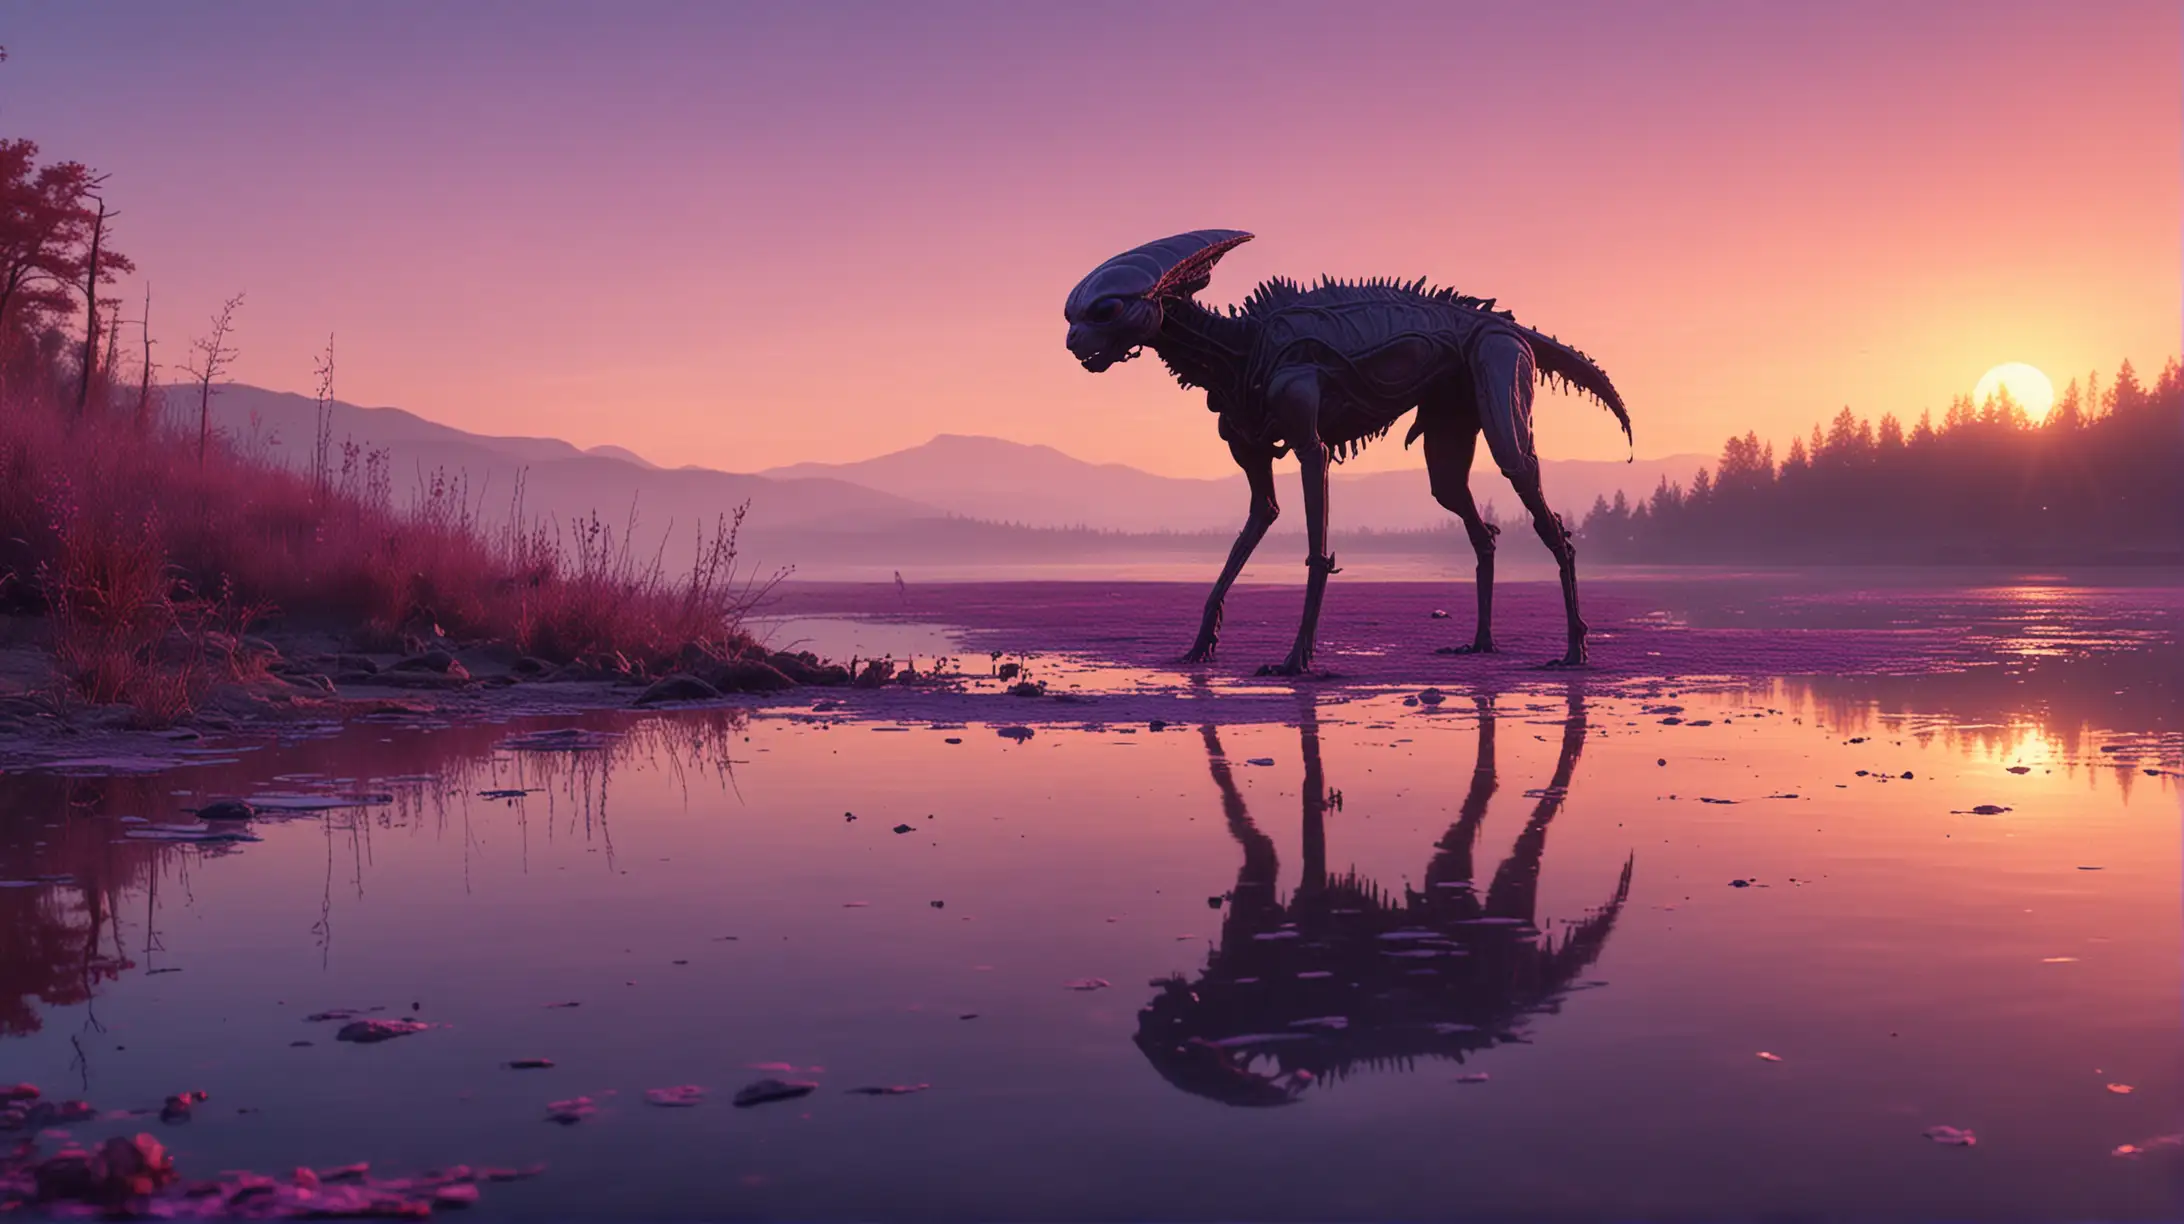 Alien Walking with Canine Companion by Violet Lake at Sunset